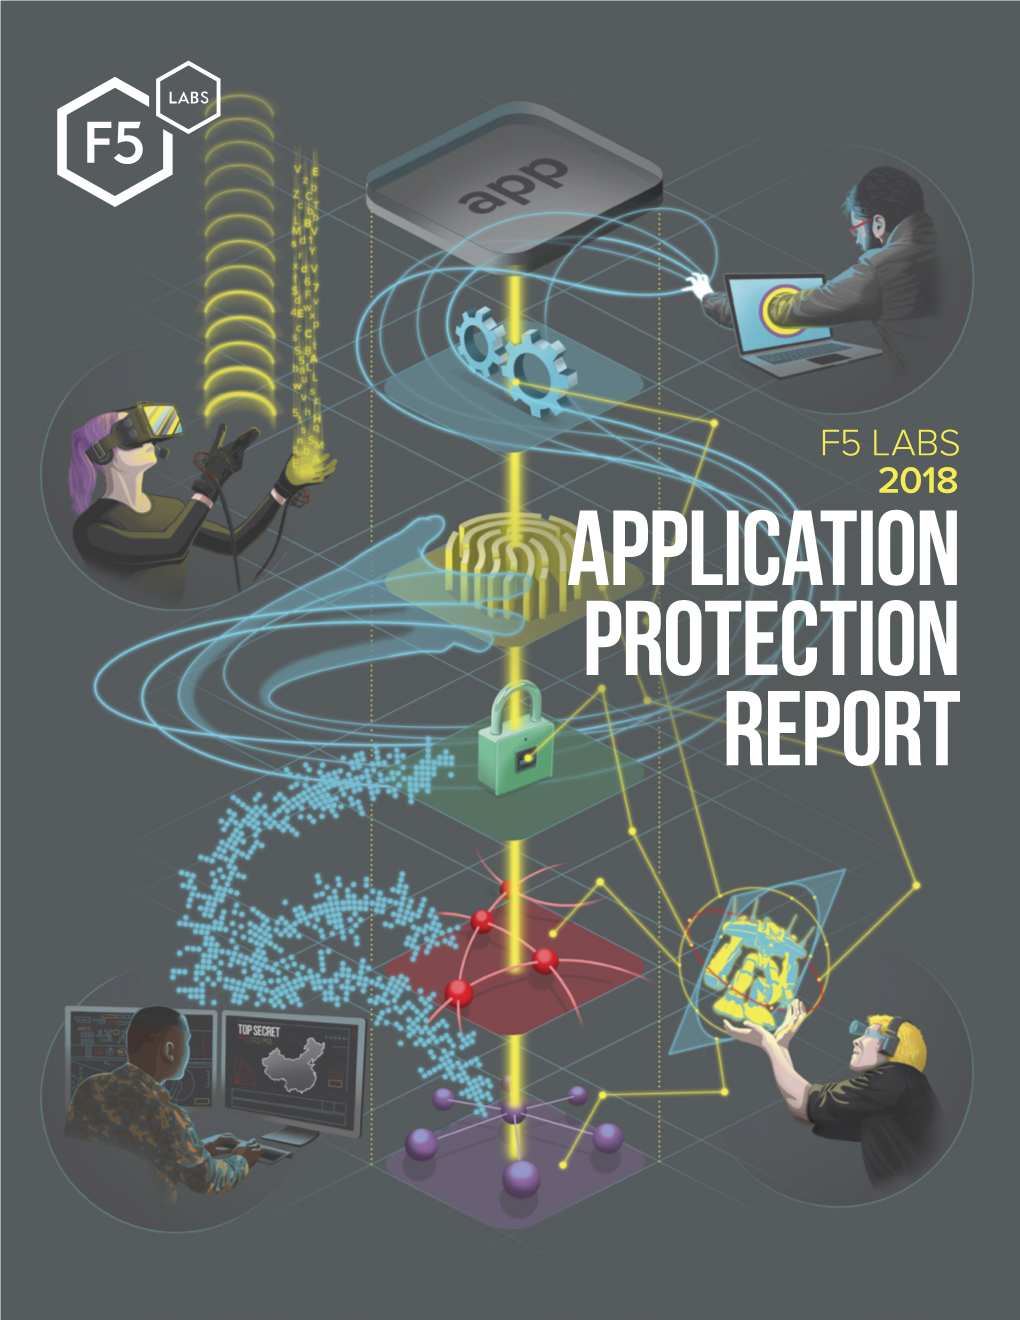 F5 Labs' Protecting Applications 2018 Report